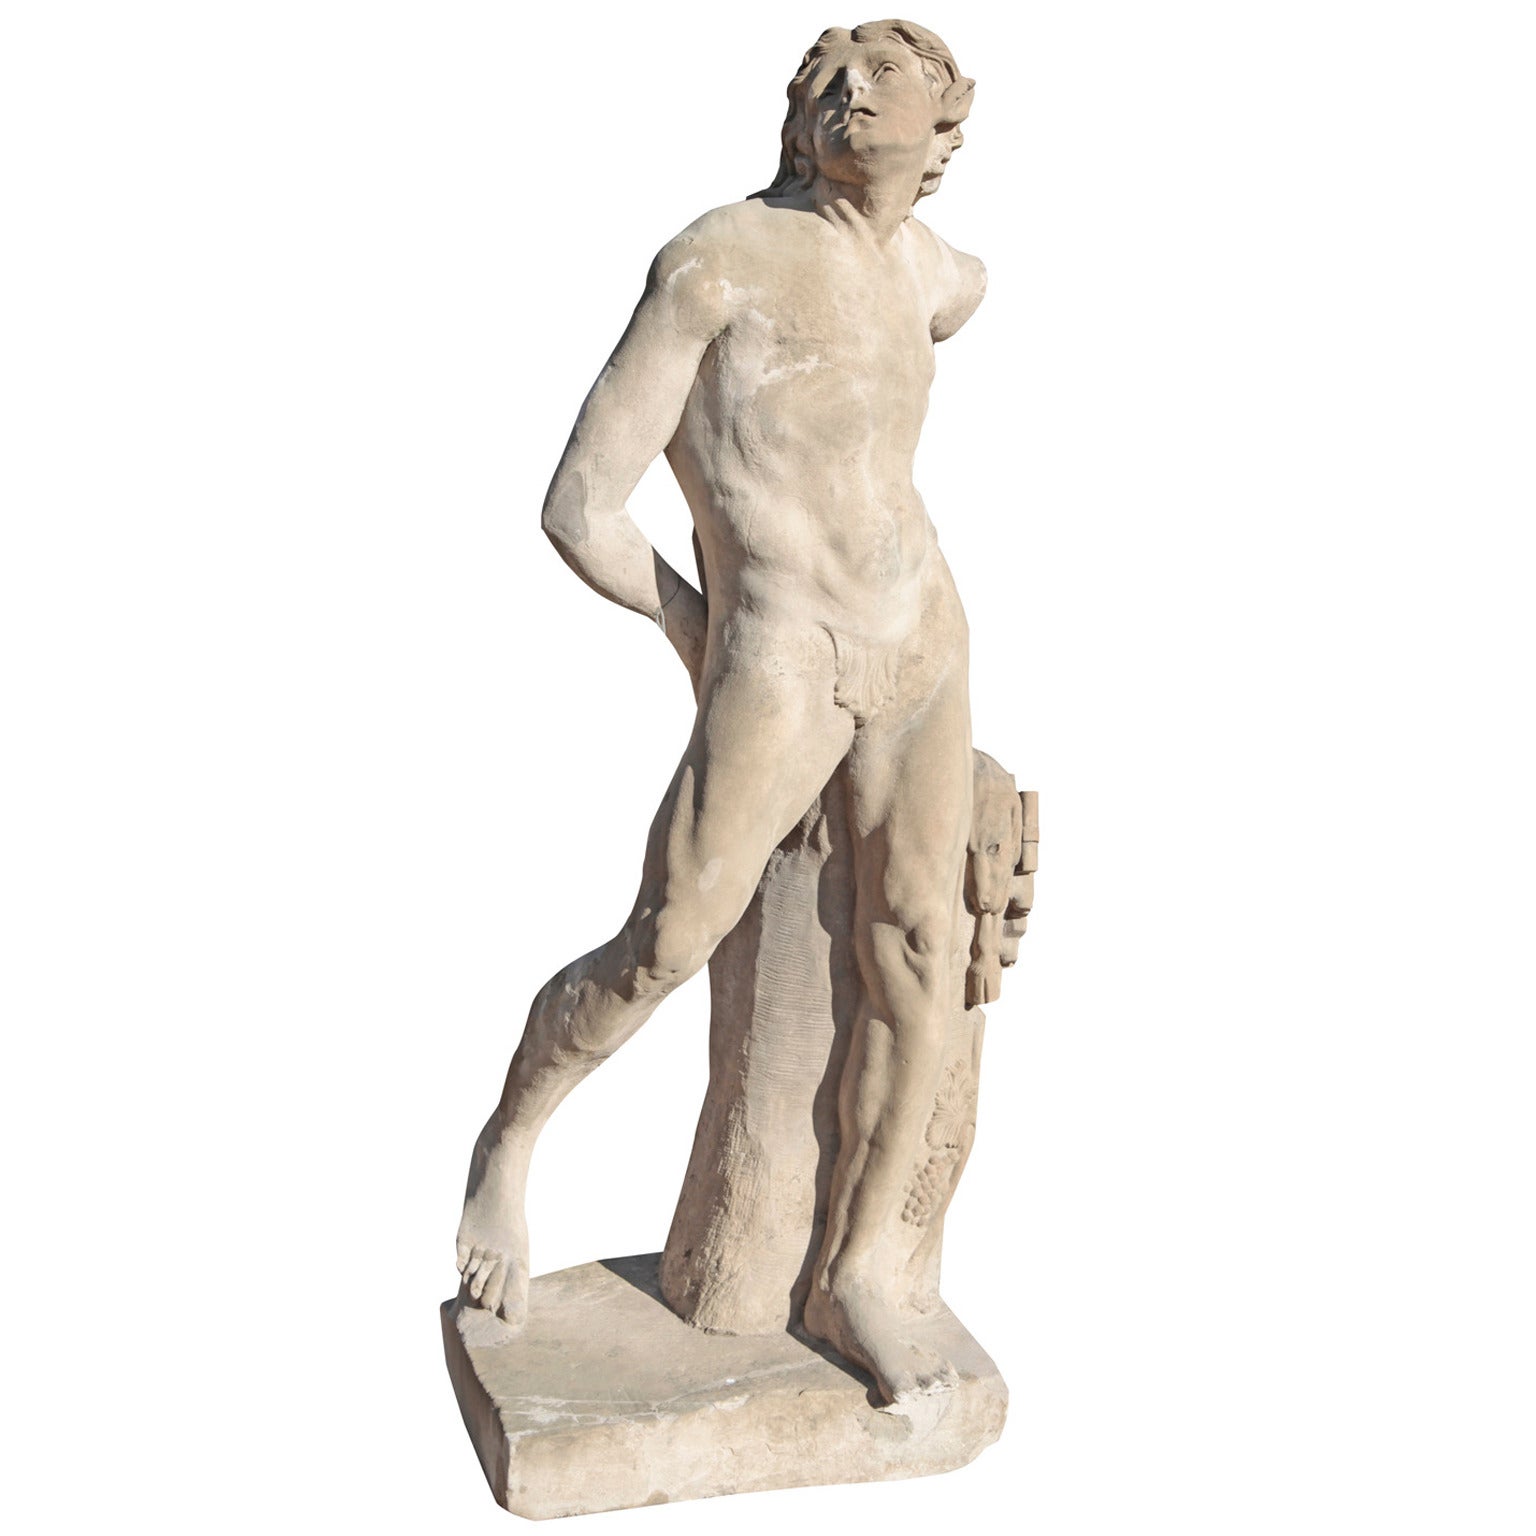 German Sculpture of a Faunus from the 18th Century